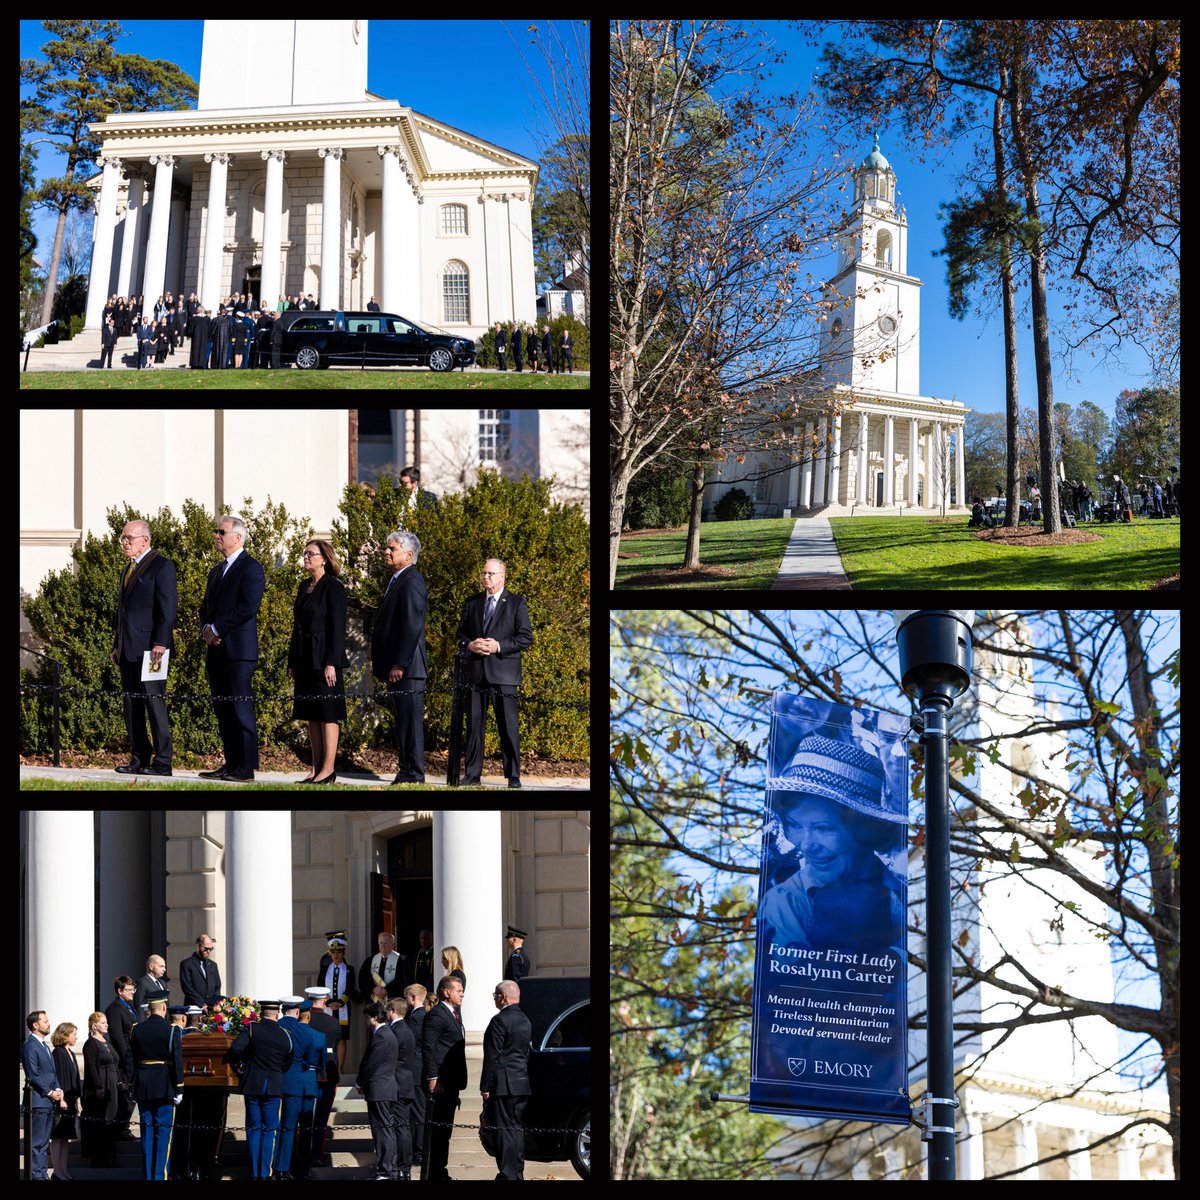 Yesterday, we gathered at Glenn Memorial Church on the Emory campus, to say farewell to First Lady Rosalynn Carter. It was a magnificent ceremony and a perfect tribute to a woman who served our nation like no one else. To see President Carter in attendance was deeply moving.